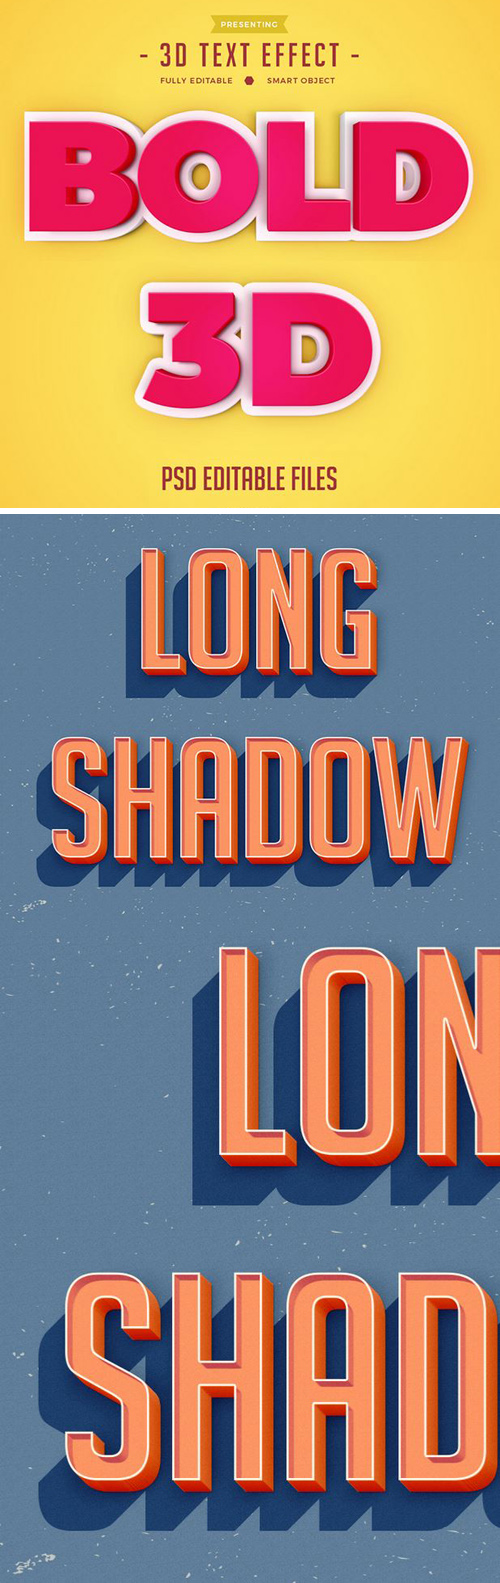 3D Bold & Long Shadow Text Effects for Photoshop